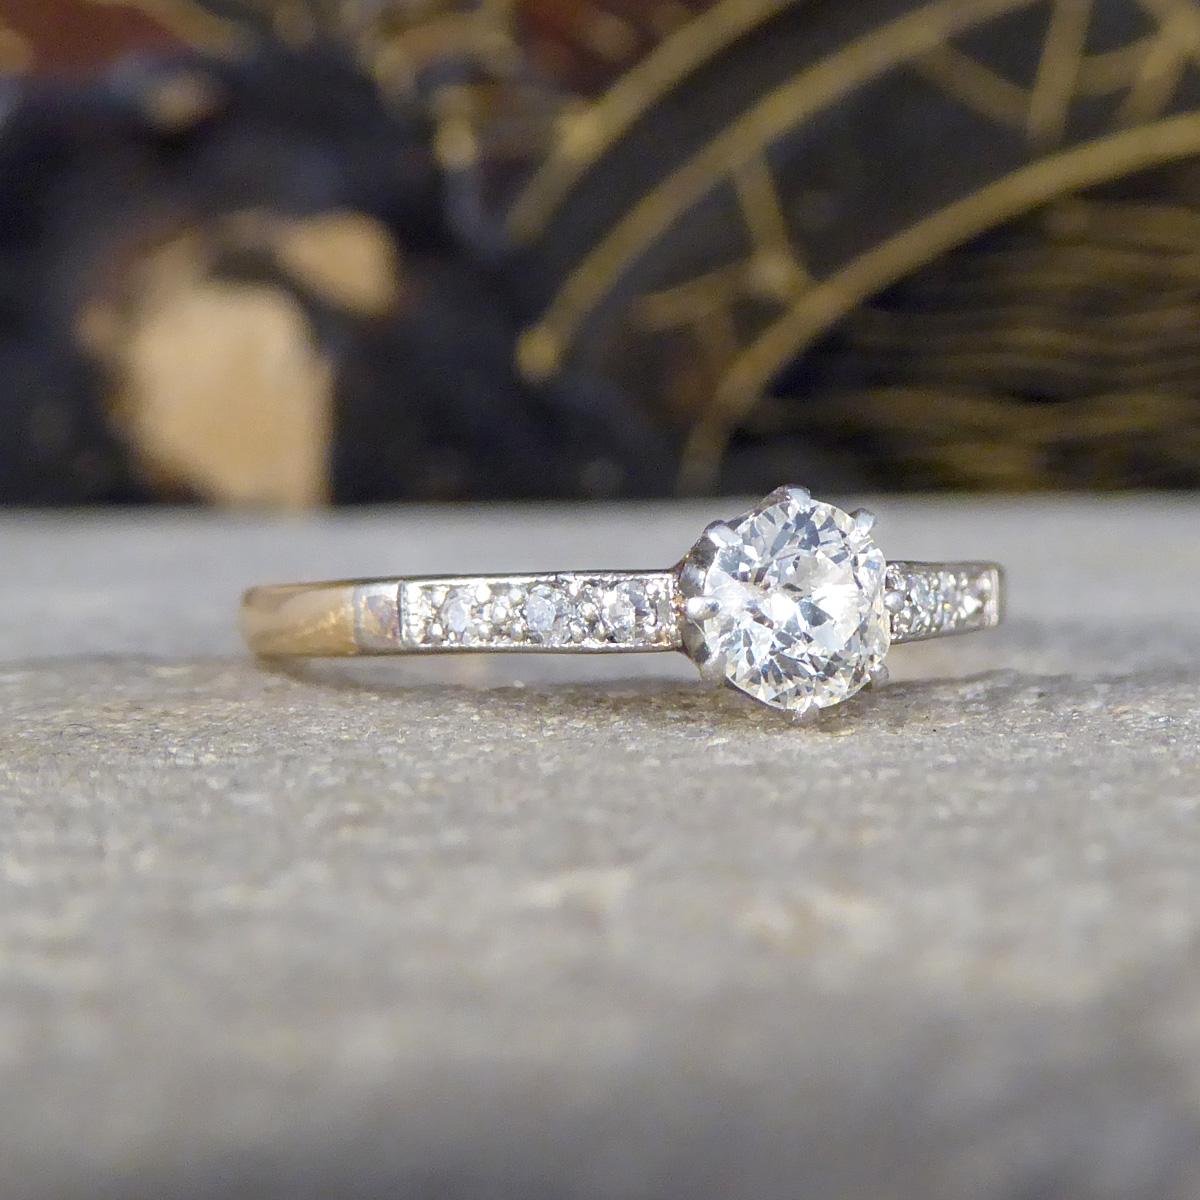 Embrace antique elegance with this 1920's Diamond solitaire engagement ring beautifully crafted in 18ct Yellow Gold and Platinum. The centre piece is a dazzling 0.35ct Old European Cut Diamond, set in platinum to enhance its brilliance with very